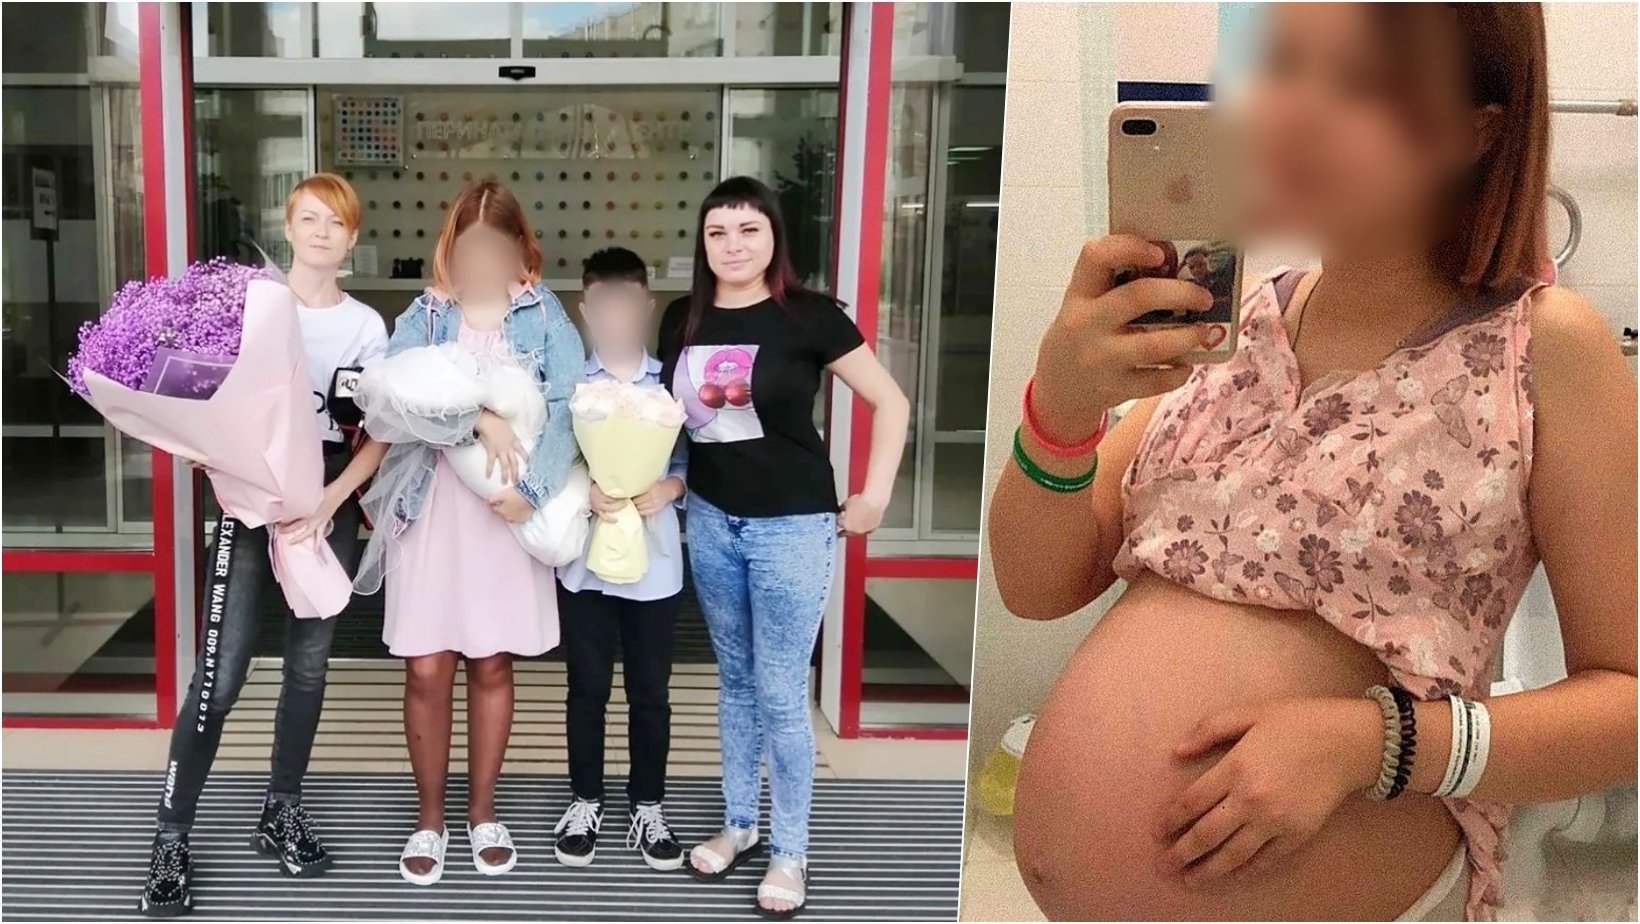 6 facebook cover 4.jpg?resize=1200,630 - Teenage Girl Who Previously Claims She Gave Birth To 10-Year-Old Boy’s Baby Announced Second Pregnancy